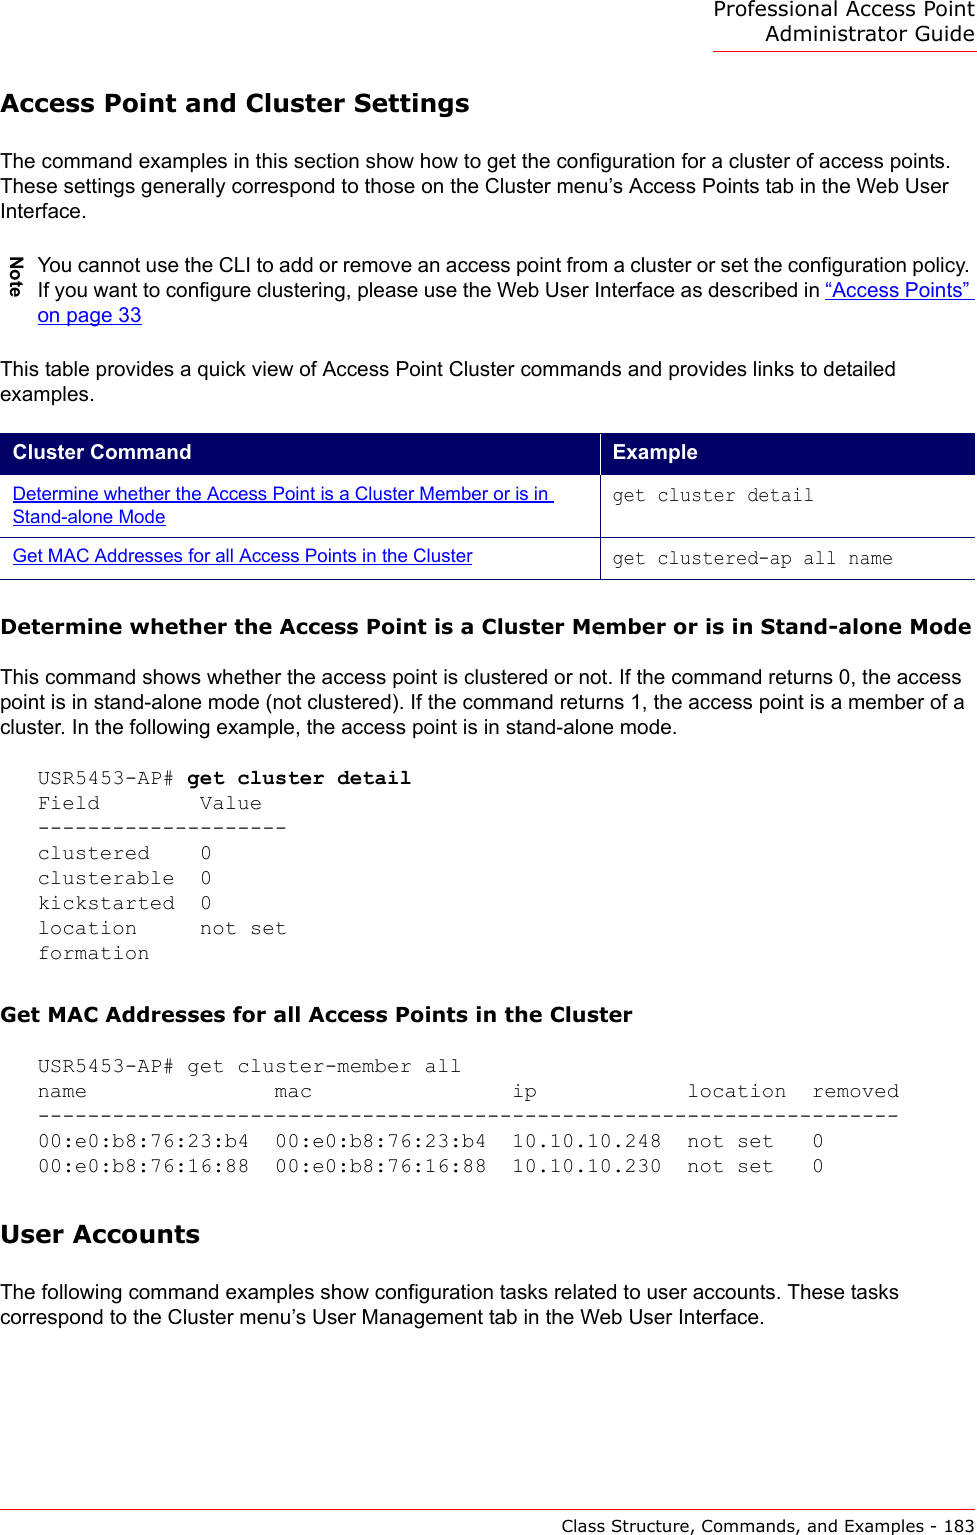 Professional Access Point Administrator GuideClass Structure, Commands, and Examples - 183Access Point and Cluster SettingsThe command examples in this section show how to get the configuration for a cluster of access points. These settings generally correspond to those on the Cluster menu’s Access Points tab in the Web User Interface.This table provides a quick view of Access Point Cluster commands and provides links to detailed examples.Determine whether the Access Point is a Cluster Member or is in Stand-alone ModeThis command shows whether the access point is clustered or not. If the command returns 0, the access point is in stand-alone mode (not clustered). If the command returns 1, the access point is a member of a cluster. In the following example, the access point is in stand-alone mode.USR5453-AP# get cluster detailField        Value--------------------clustered    0clusterable  0kickstarted  0location     not setformationGet MAC Addresses for all Access Points in the ClusterUSR5453-AP# get cluster-member allname               mac                ip            location  removed---------------------------------------------------------------------00:e0:b8:76:23:b4  00:e0:b8:76:23:b4  10.10.10.248  not set   000:e0:b8:76:16:88  00:e0:b8:76:16:88  10.10.10.230  not set   0User AccountsThe following command examples show configuration tasks related to user accounts. These tasks correspond to the Cluster menu’s User Management tab in the Web User Interface.NoteYou cannot use the CLI to add or remove an access point from a cluster or set the configuration policy. If you want to configure clustering, please use the Web User Interface as described in “Access Points” on page 33Cluster Command ExampleDetermine whether the Access Point is a Cluster Member or is in Stand-alone Modeget cluster detailGet MAC Addresses for all Access Points in the Clusterget clustered-ap all name